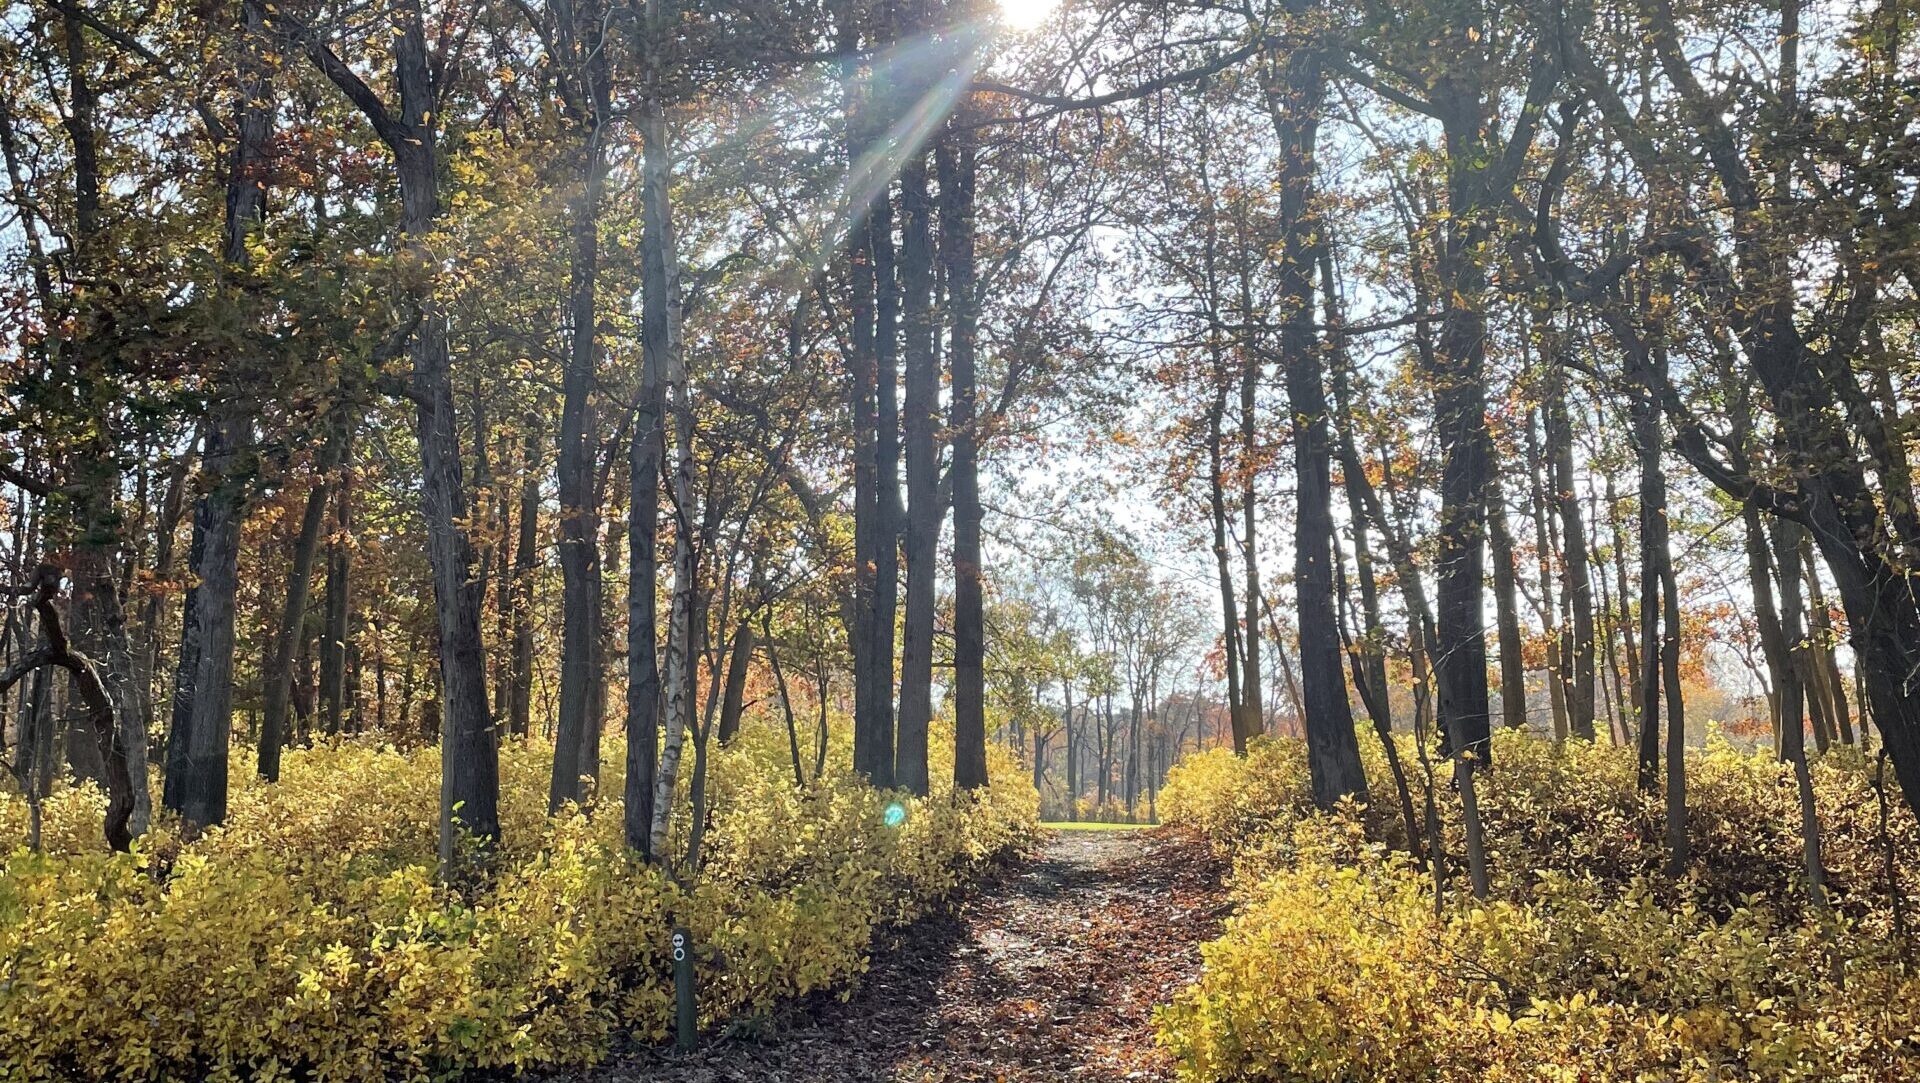 The sun shines through a wooded path during autumn. The leaves are yellow.